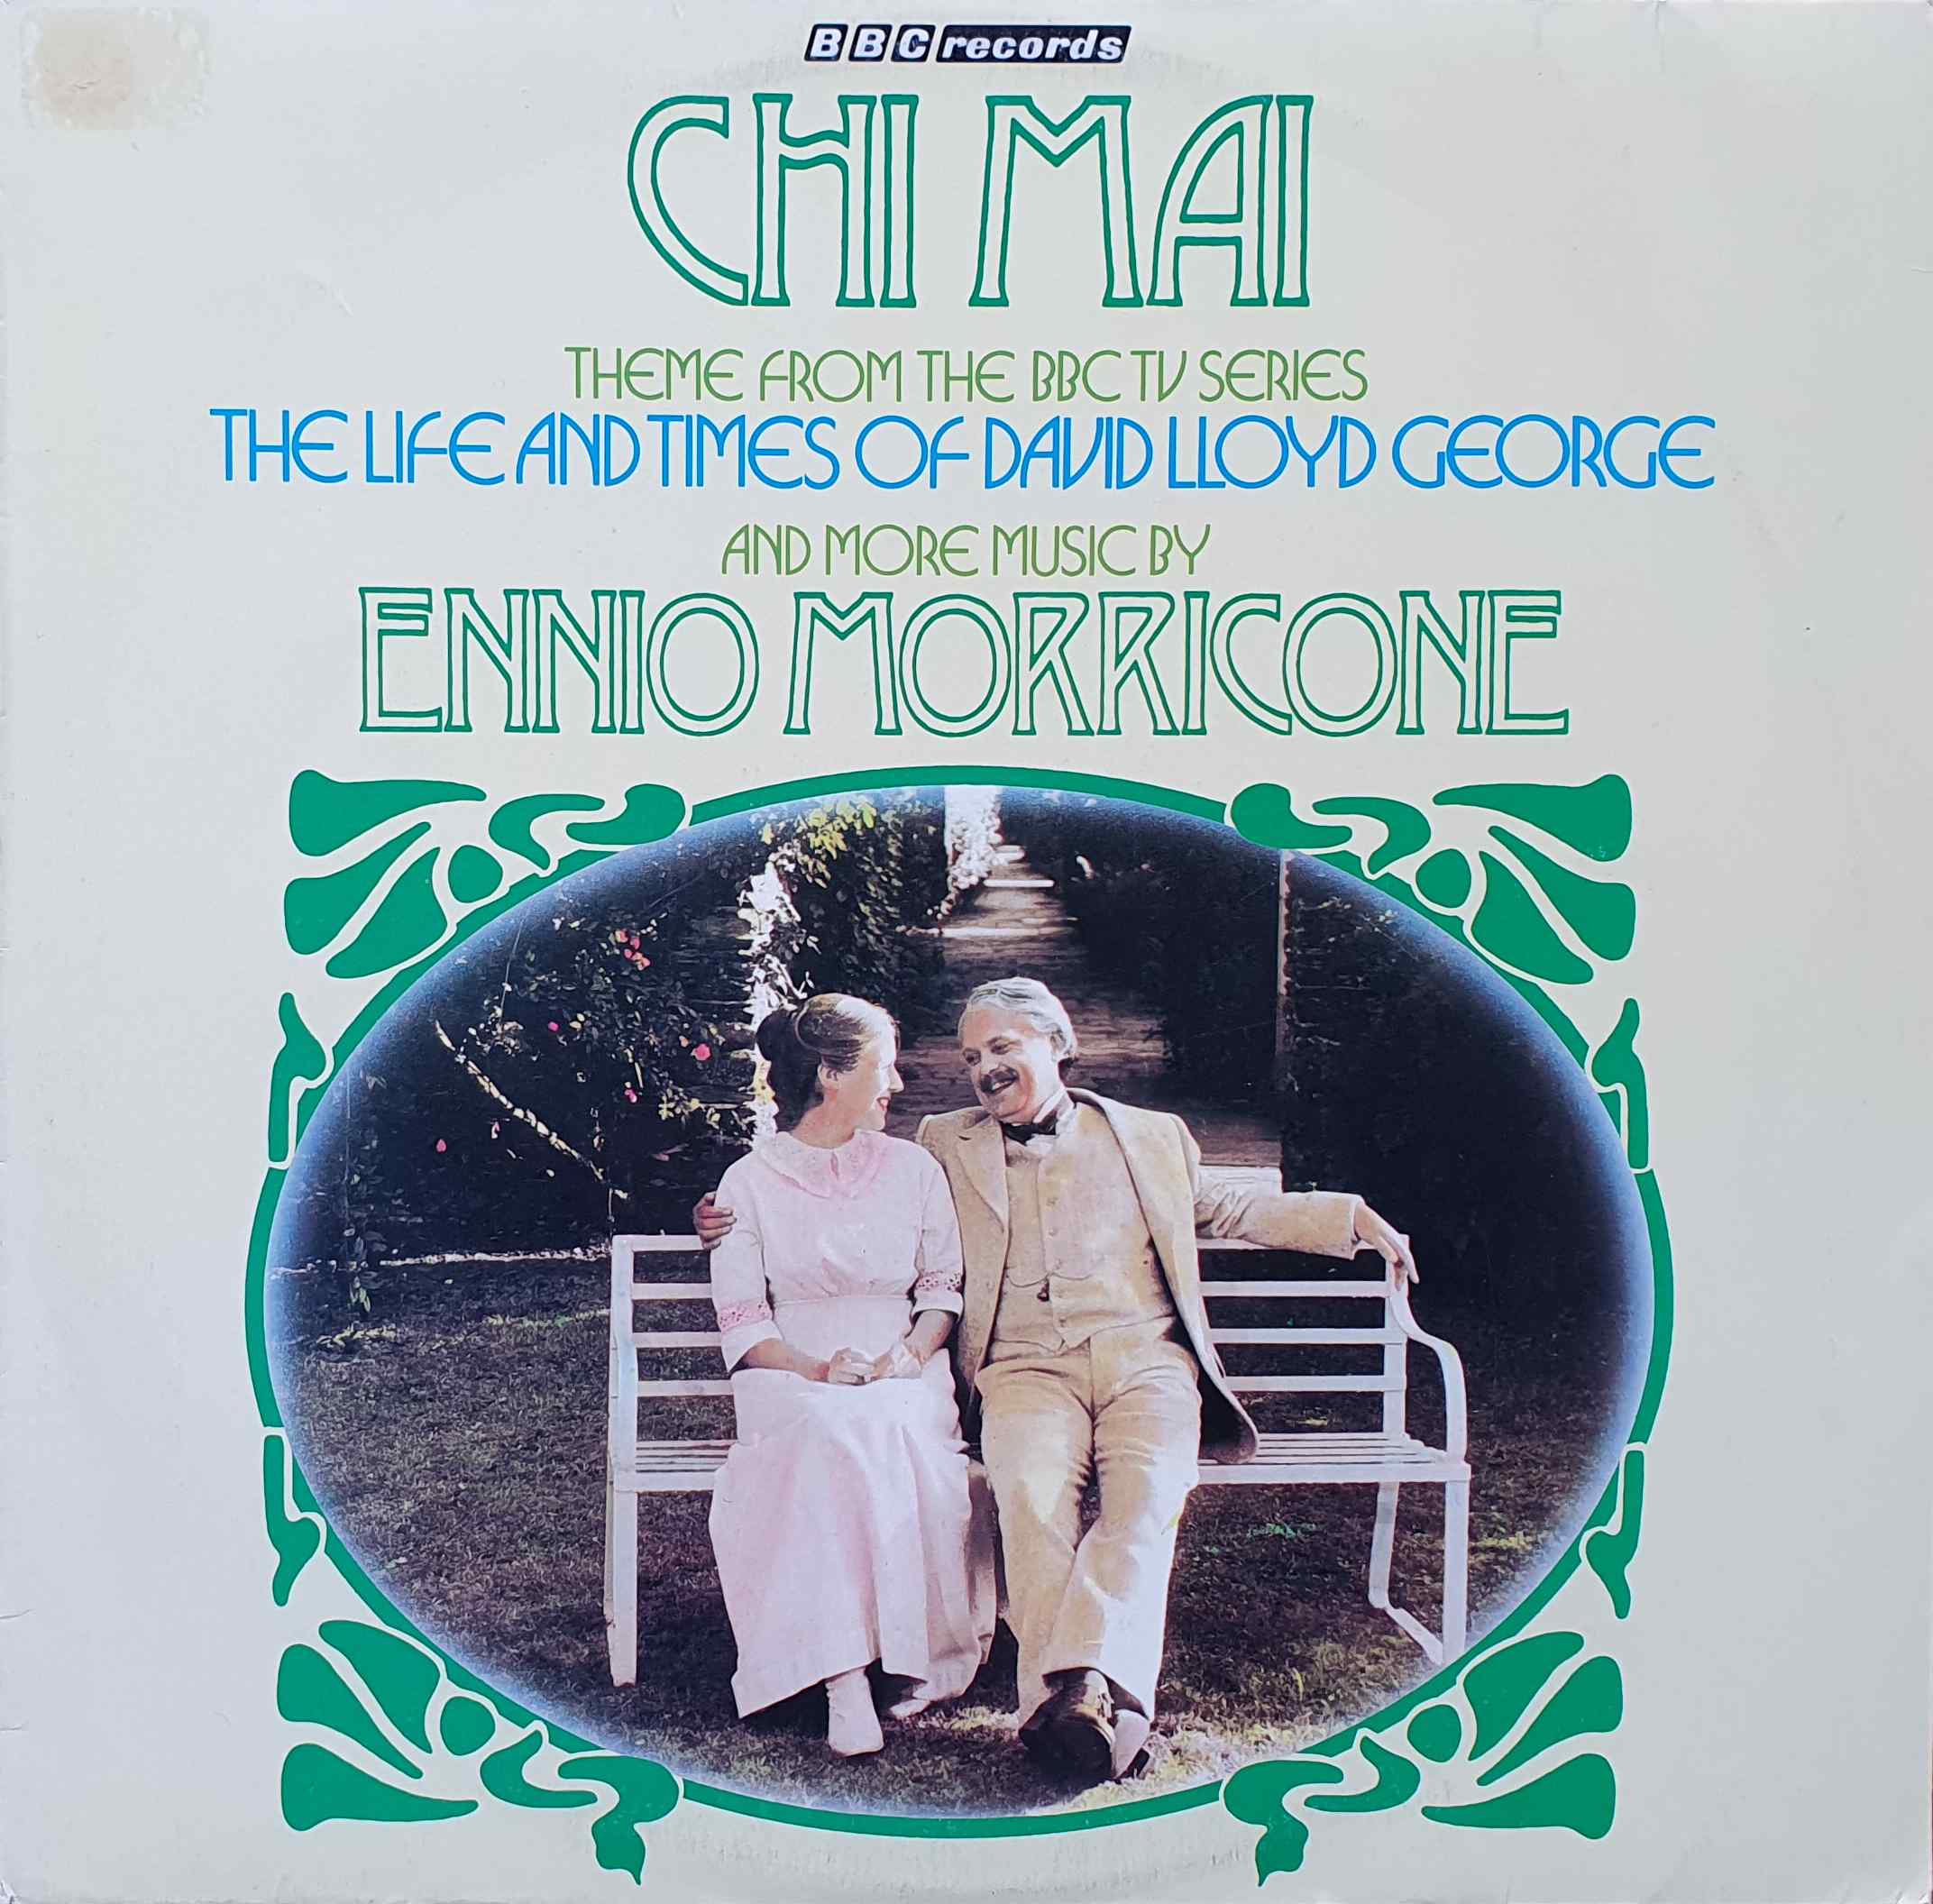 Picture of 2964 069 Chi Mai (Australian import) by artist Ennio Morricone from the BBC albums - Records and Tapes library